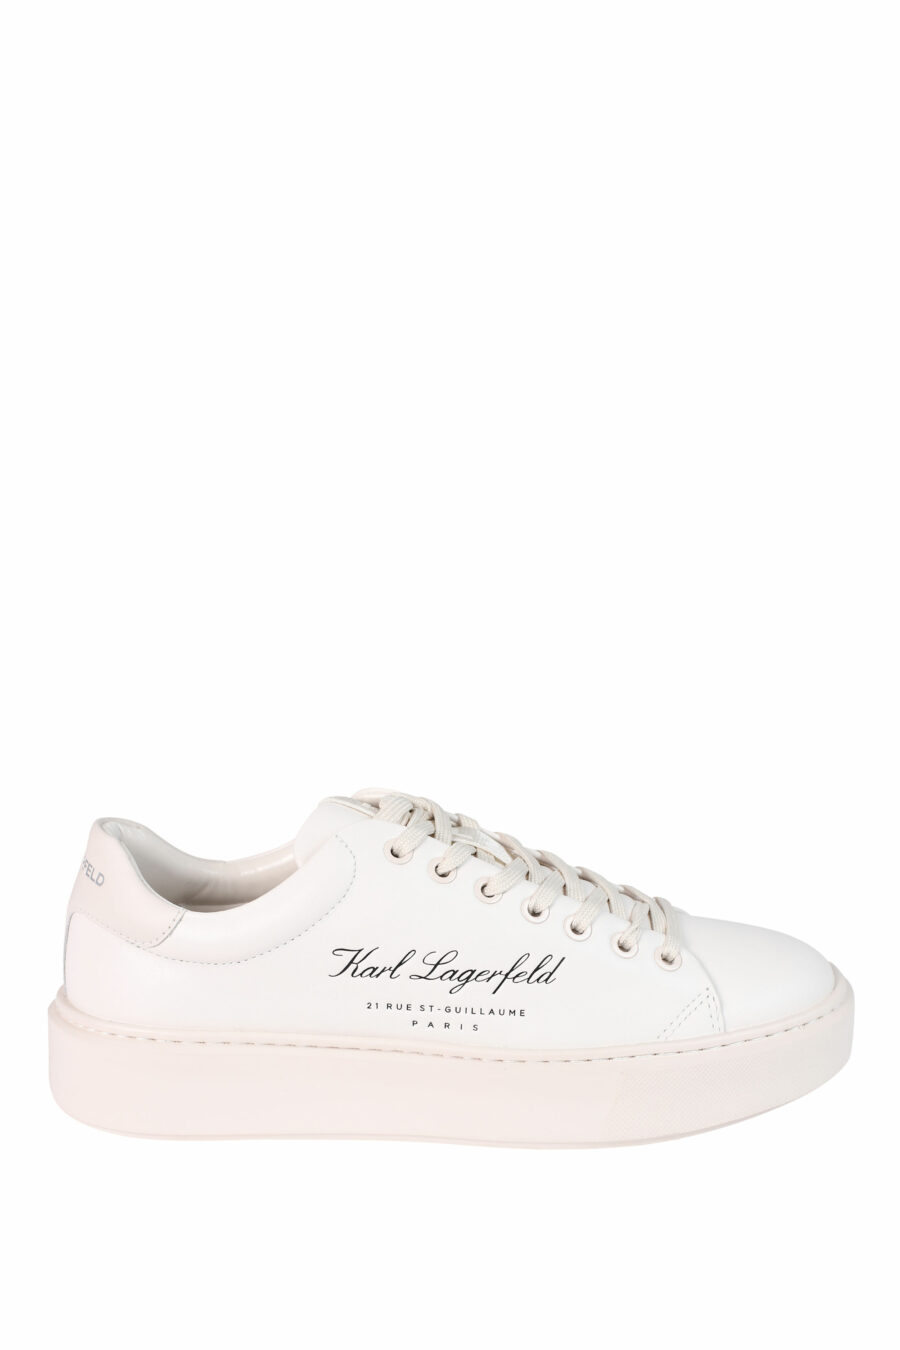 White trainers with calligraphic "hotel" logo - 5059529251054